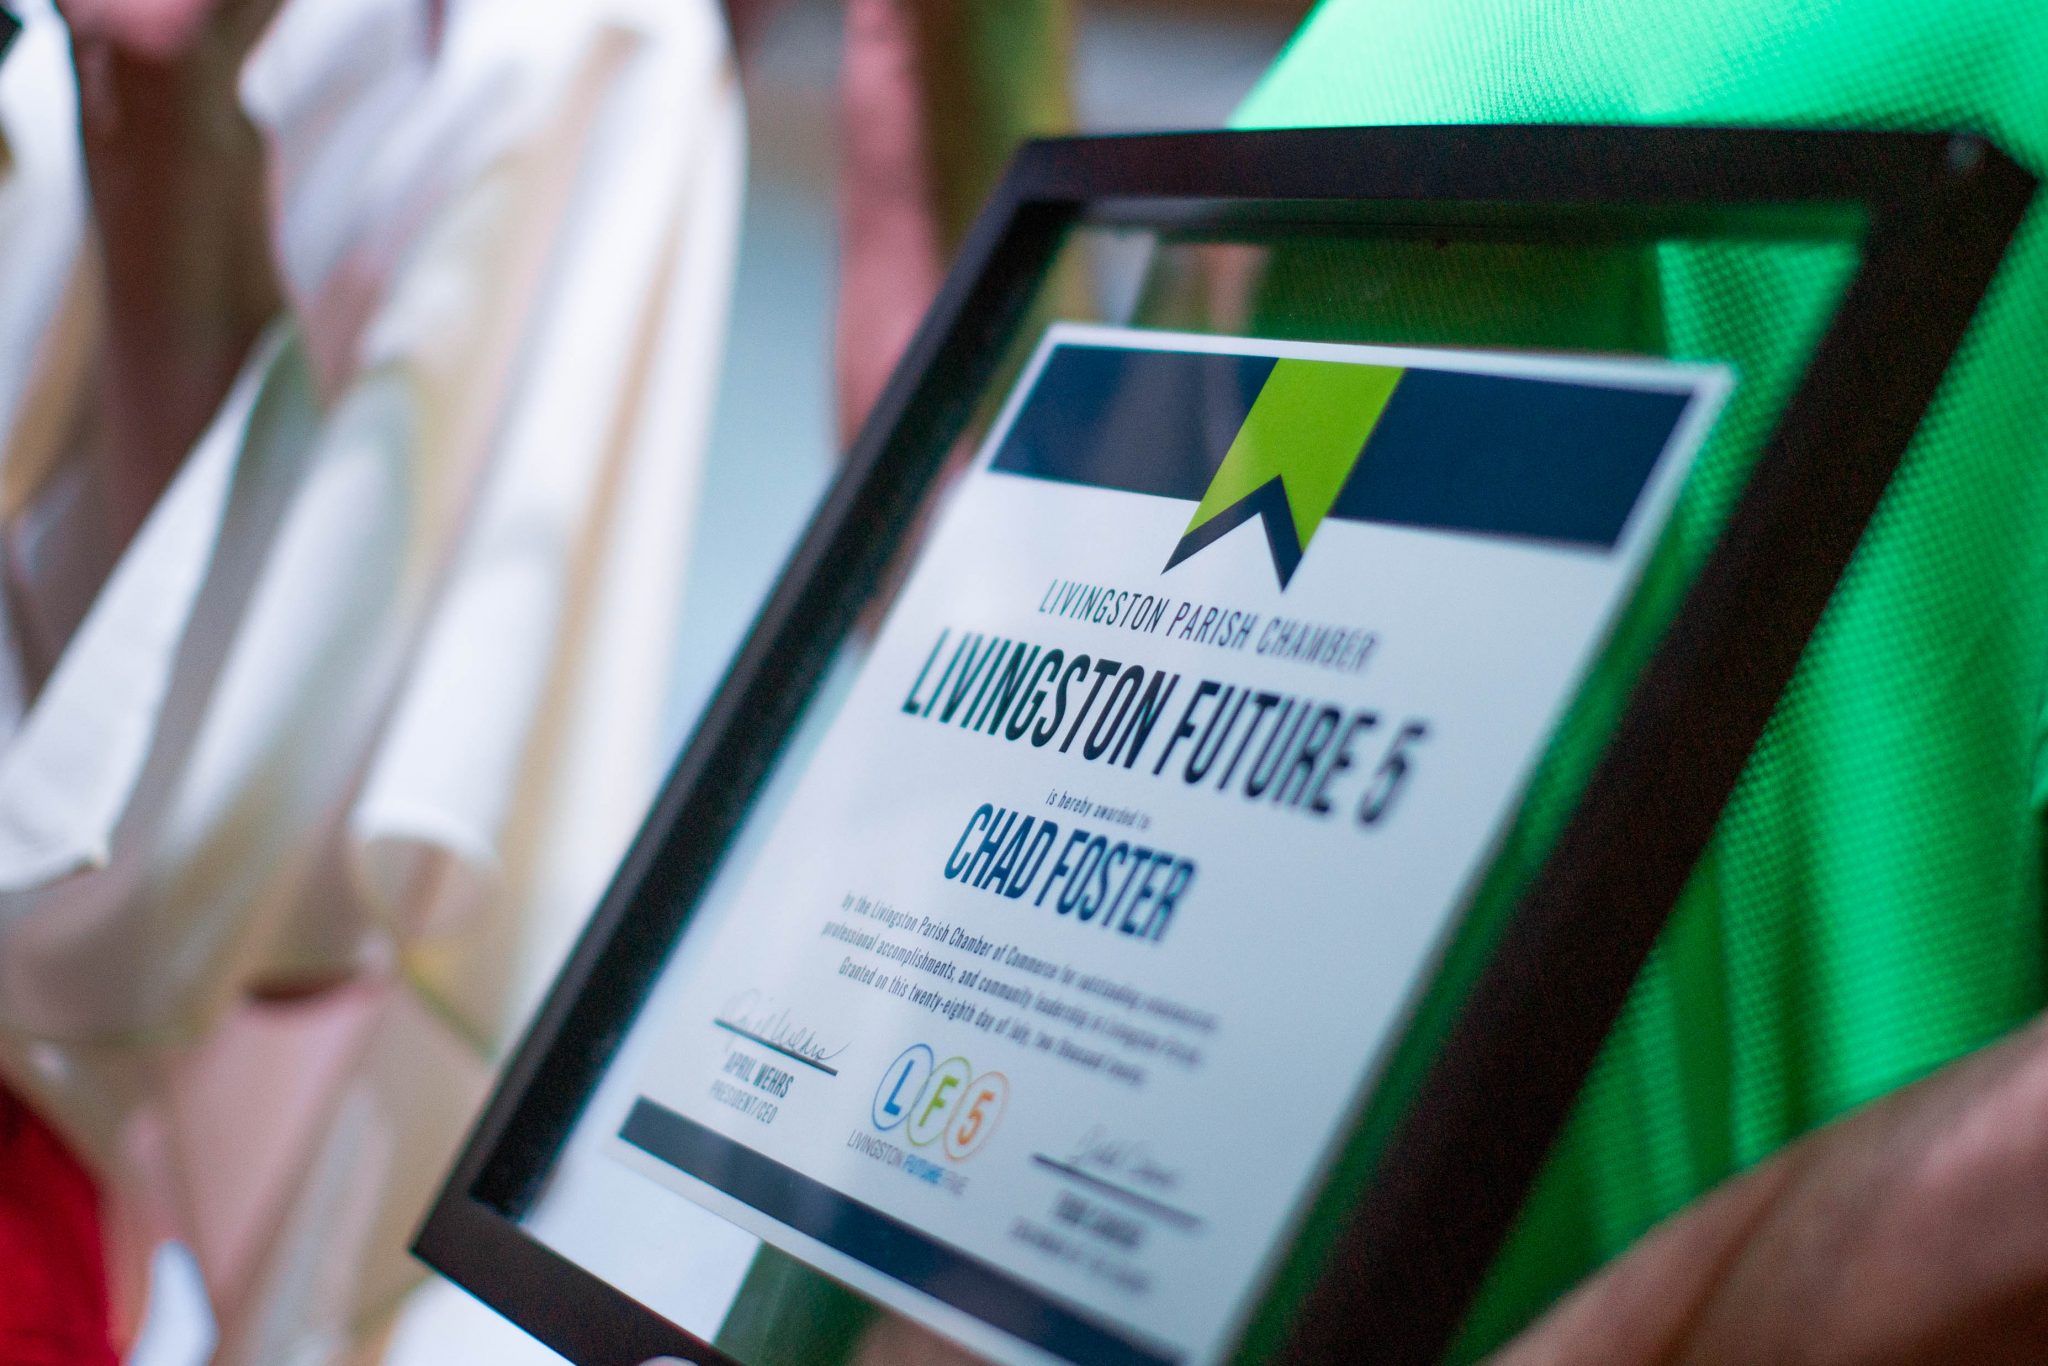 Chad Foster Receives Livingston Future 5 Award